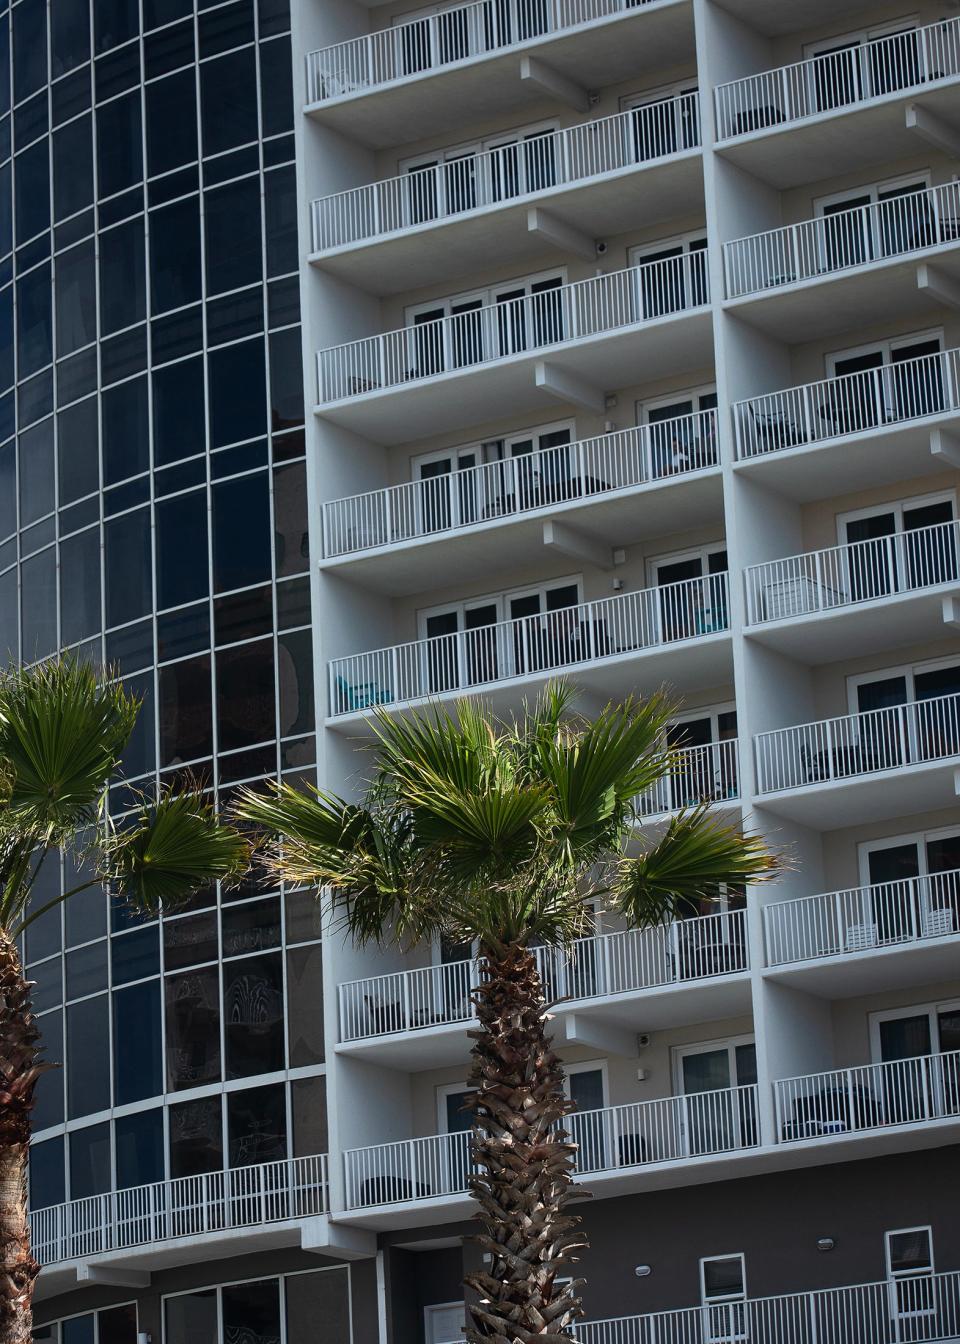 The Laketown Wharf condominium is seen in Panama City Beach on April 11. City officials issued an evacuation order for 63 units because of two unsafe stairwells.